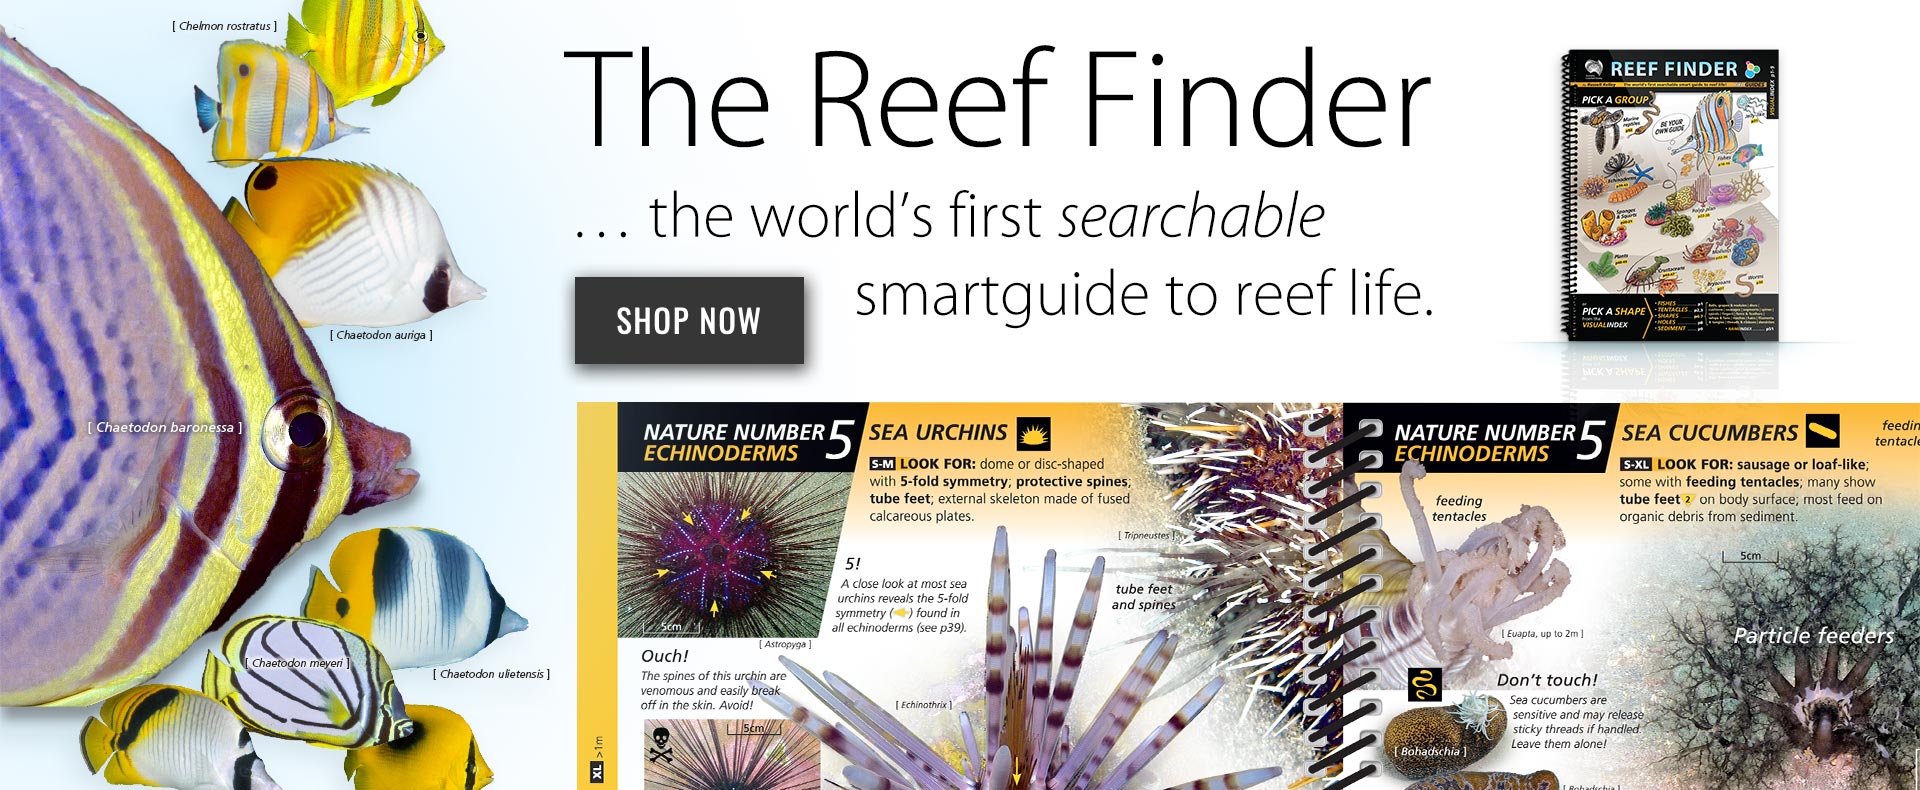 The Reef Finder ... the world’s first searchable smartguide to reef life.